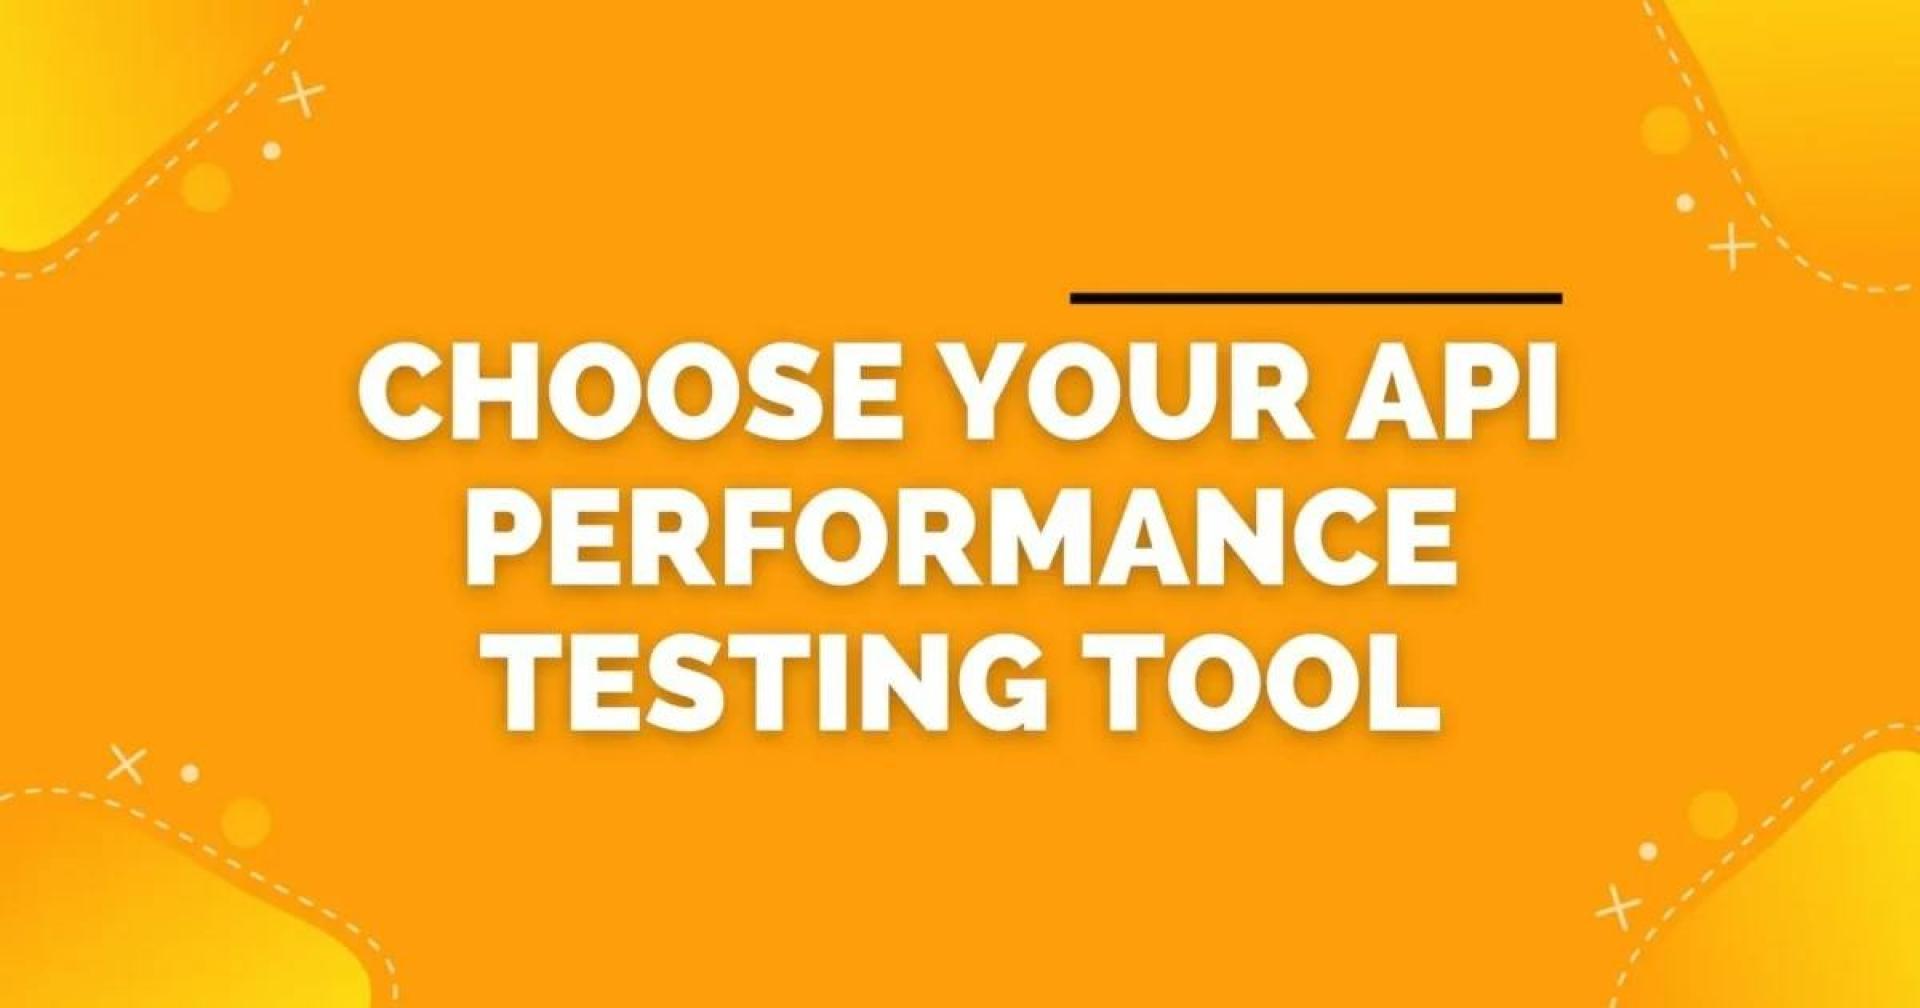 How to choose your API Performance testing tool – A guide for different use cases